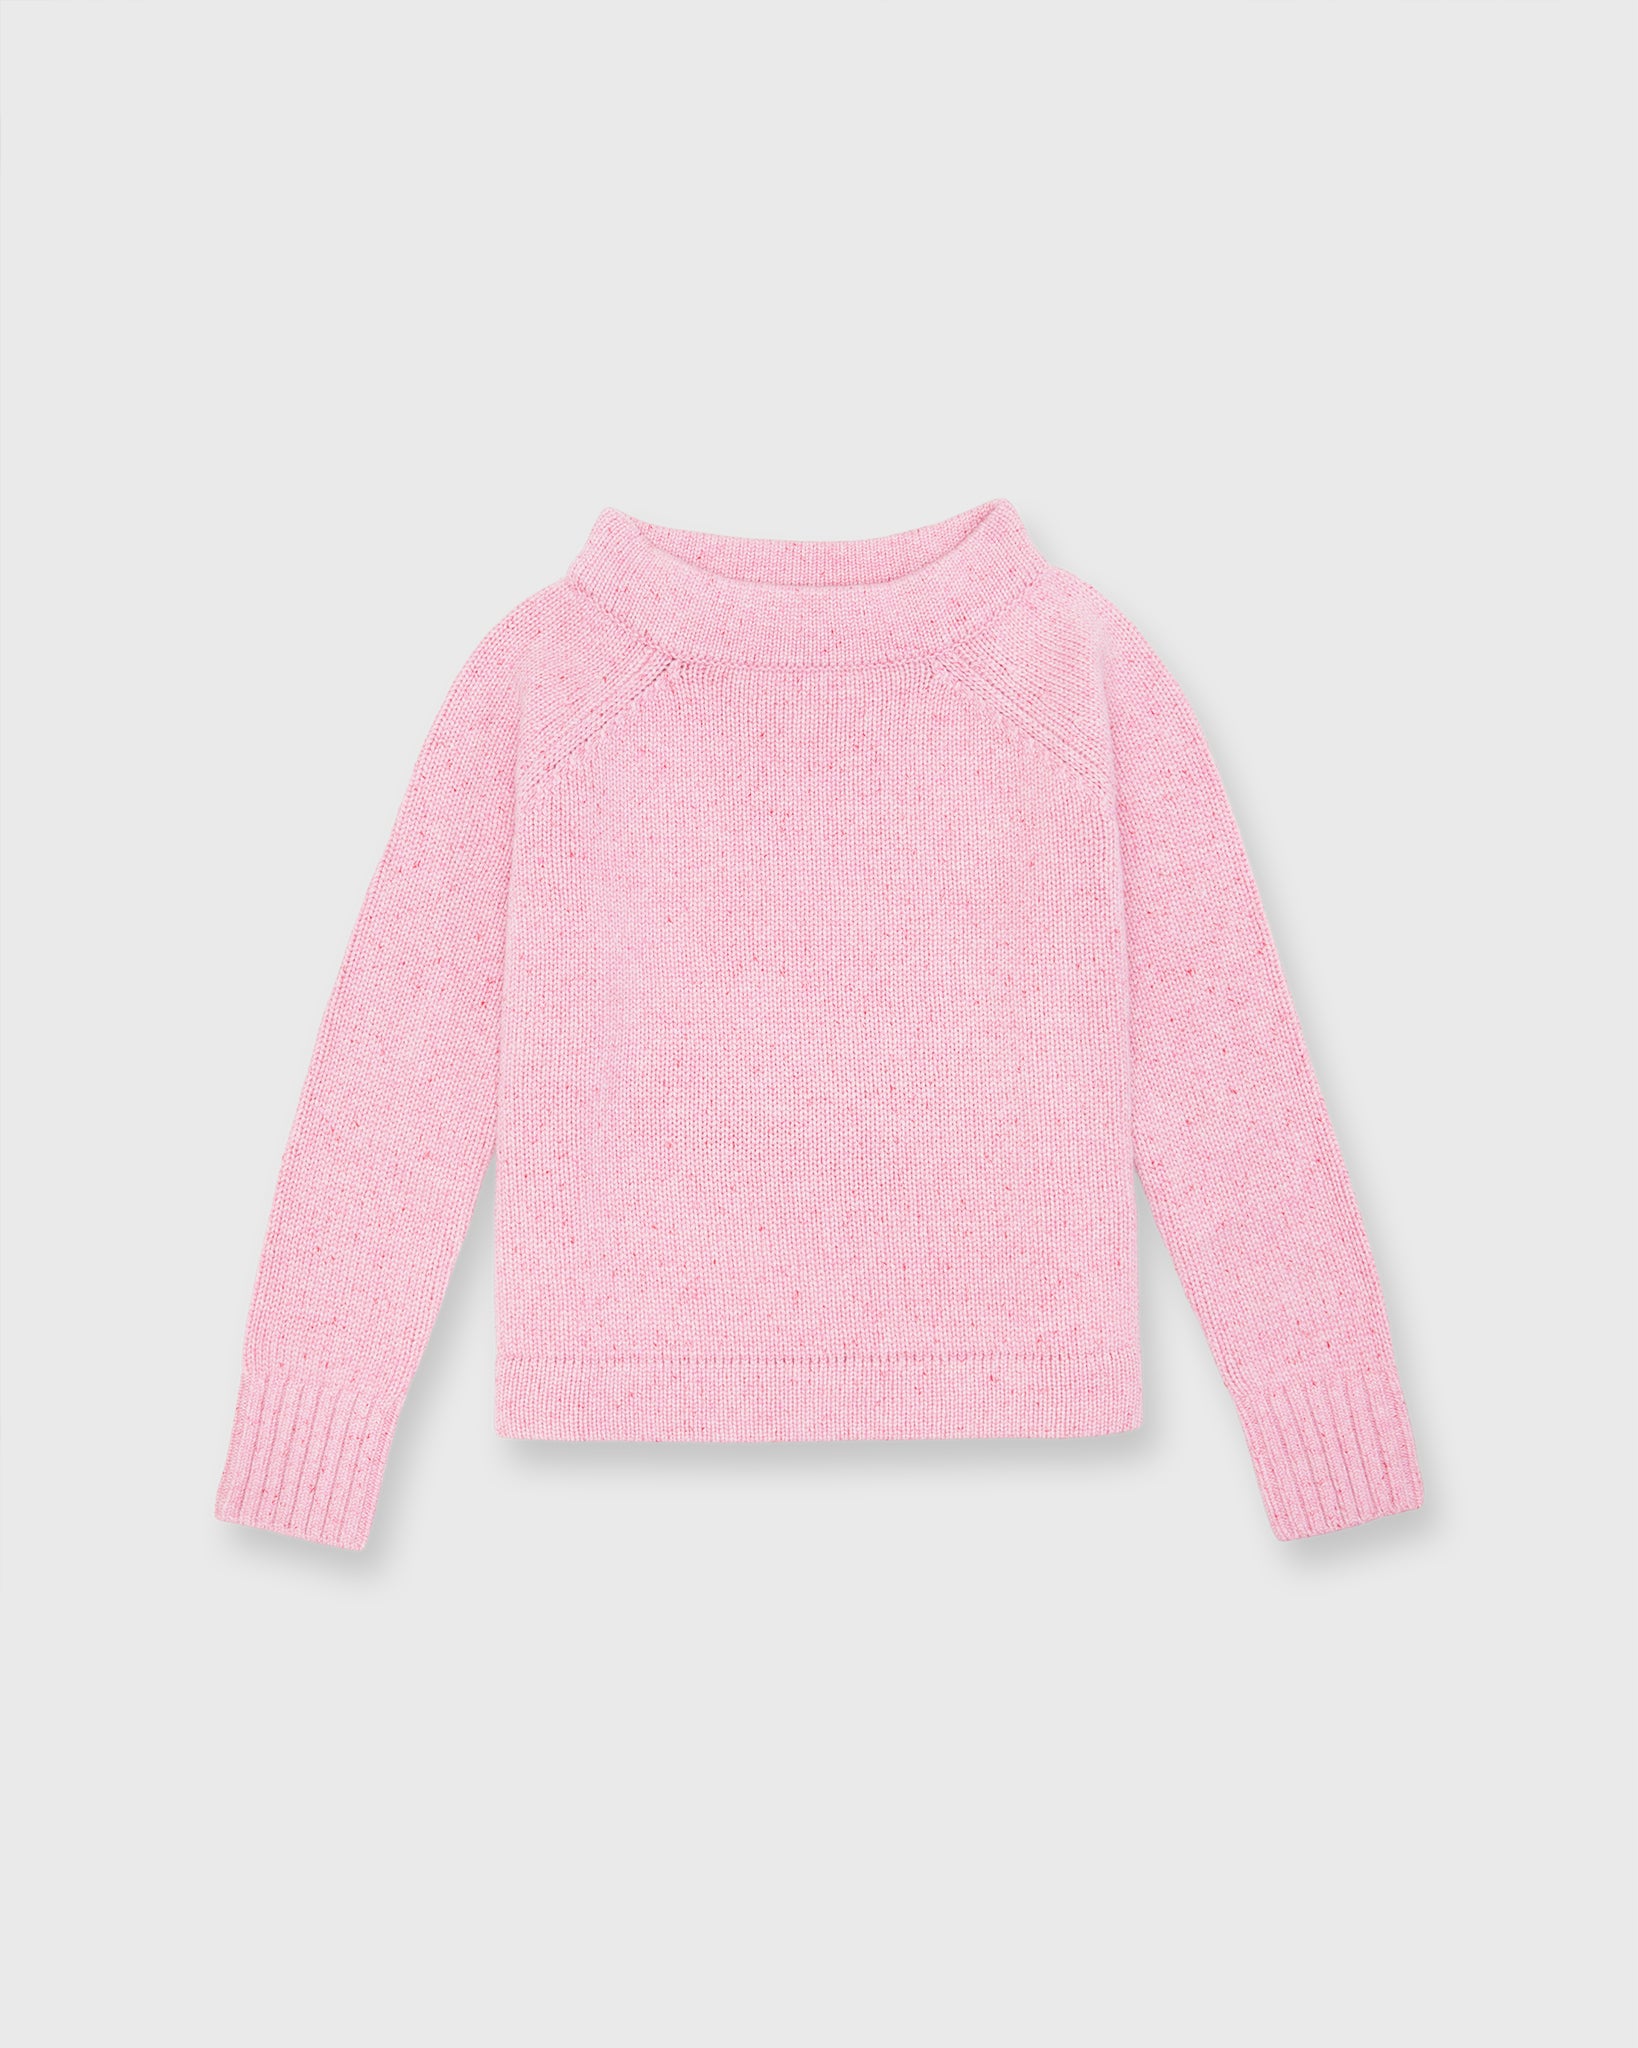 Mashburn Ann in Cashmere Sweater Shop Pink Donegal Golightly |